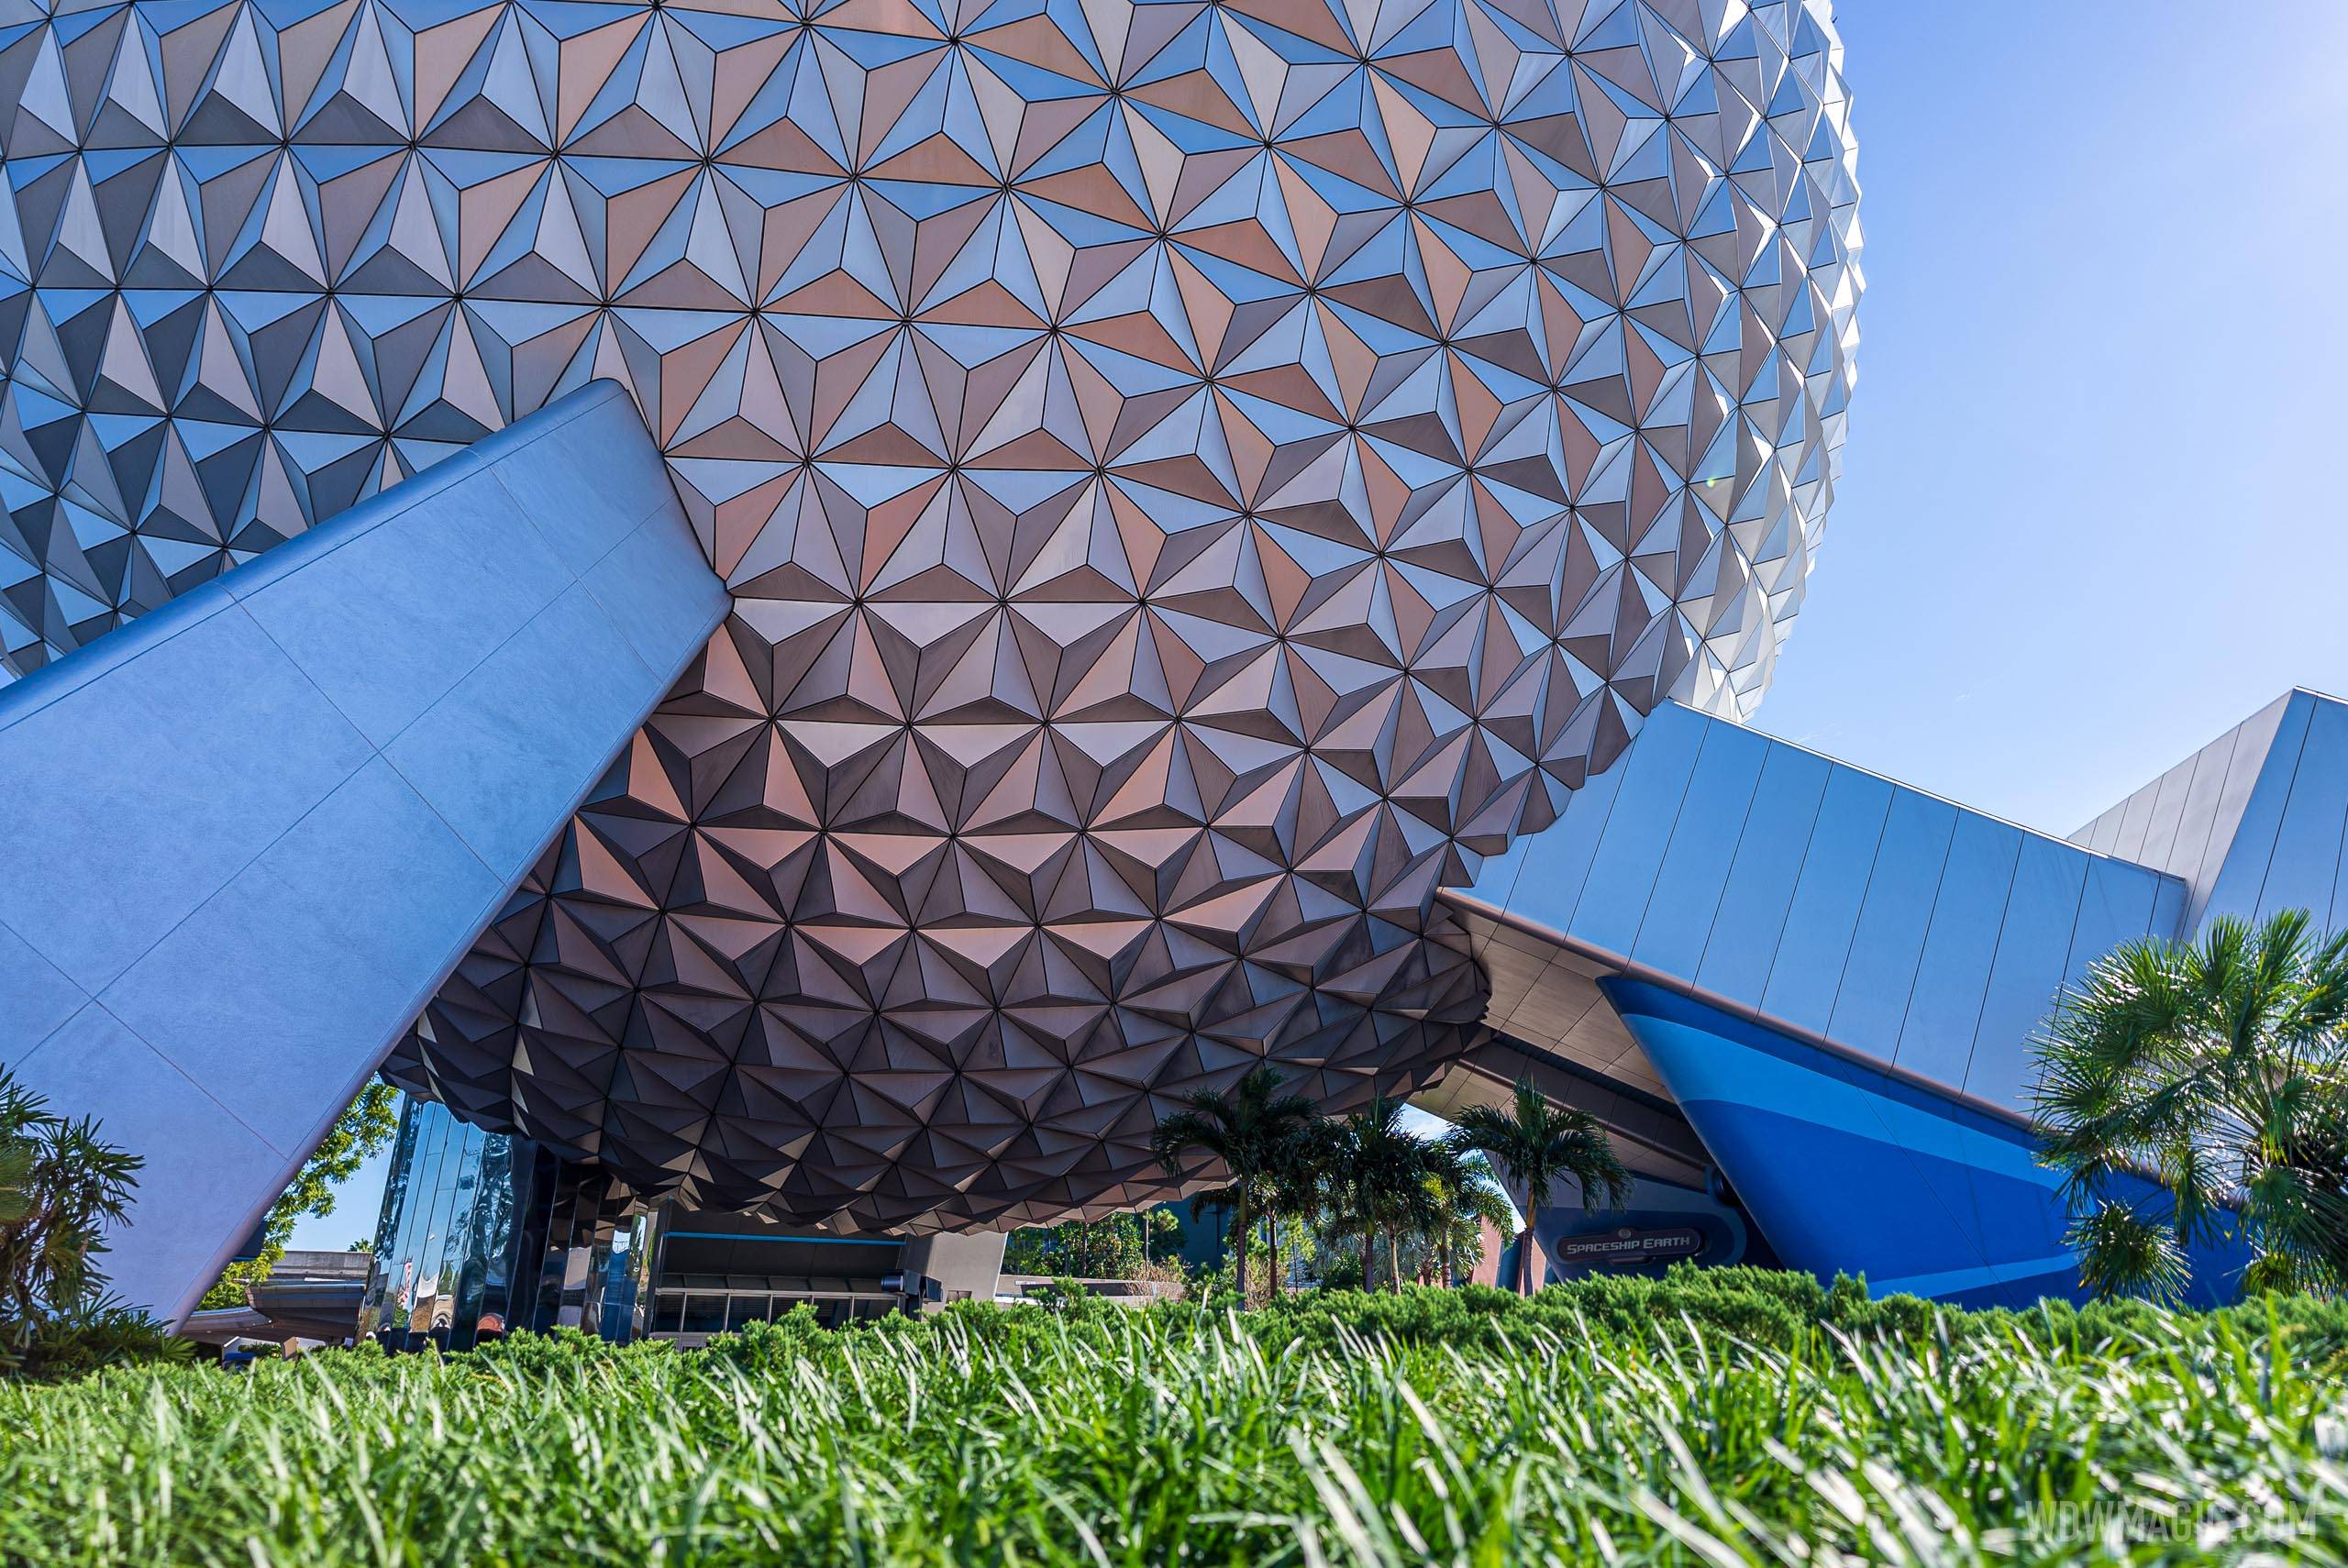 Permits filed for lighting equipment at Spaceship Earth